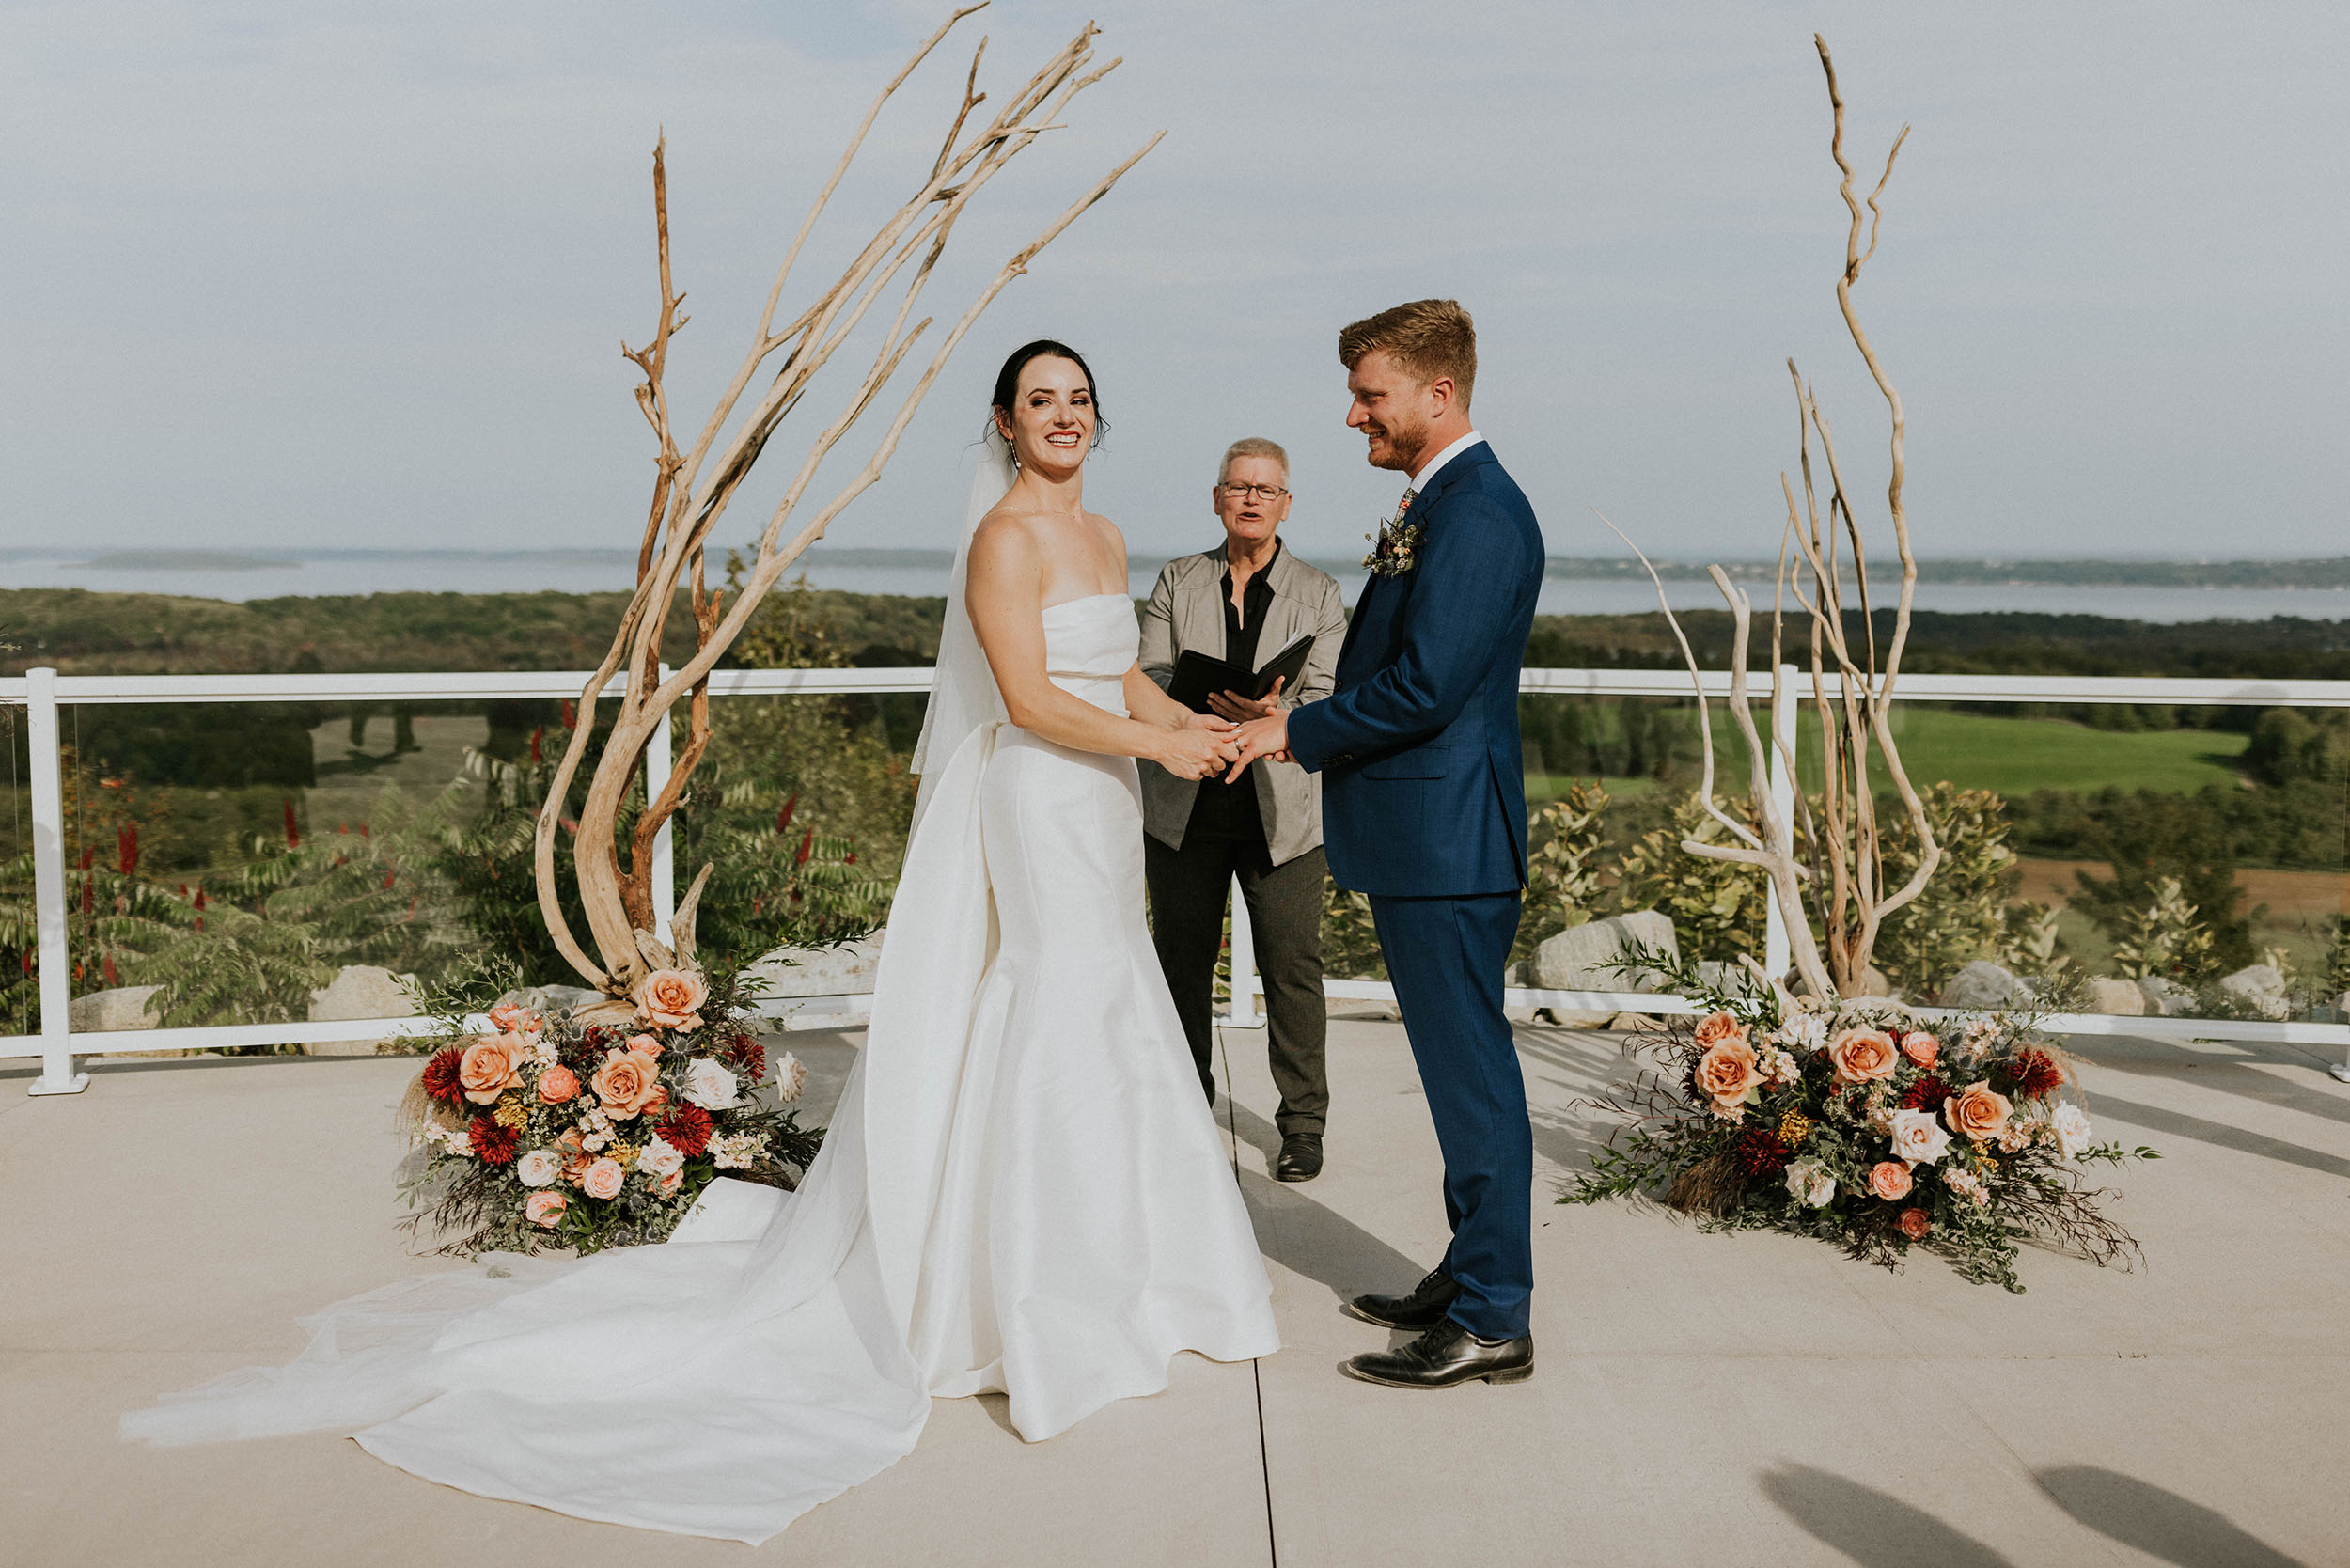 A colorful fall wedding ceremony at Bayview Weddings at Gallagher Farms.